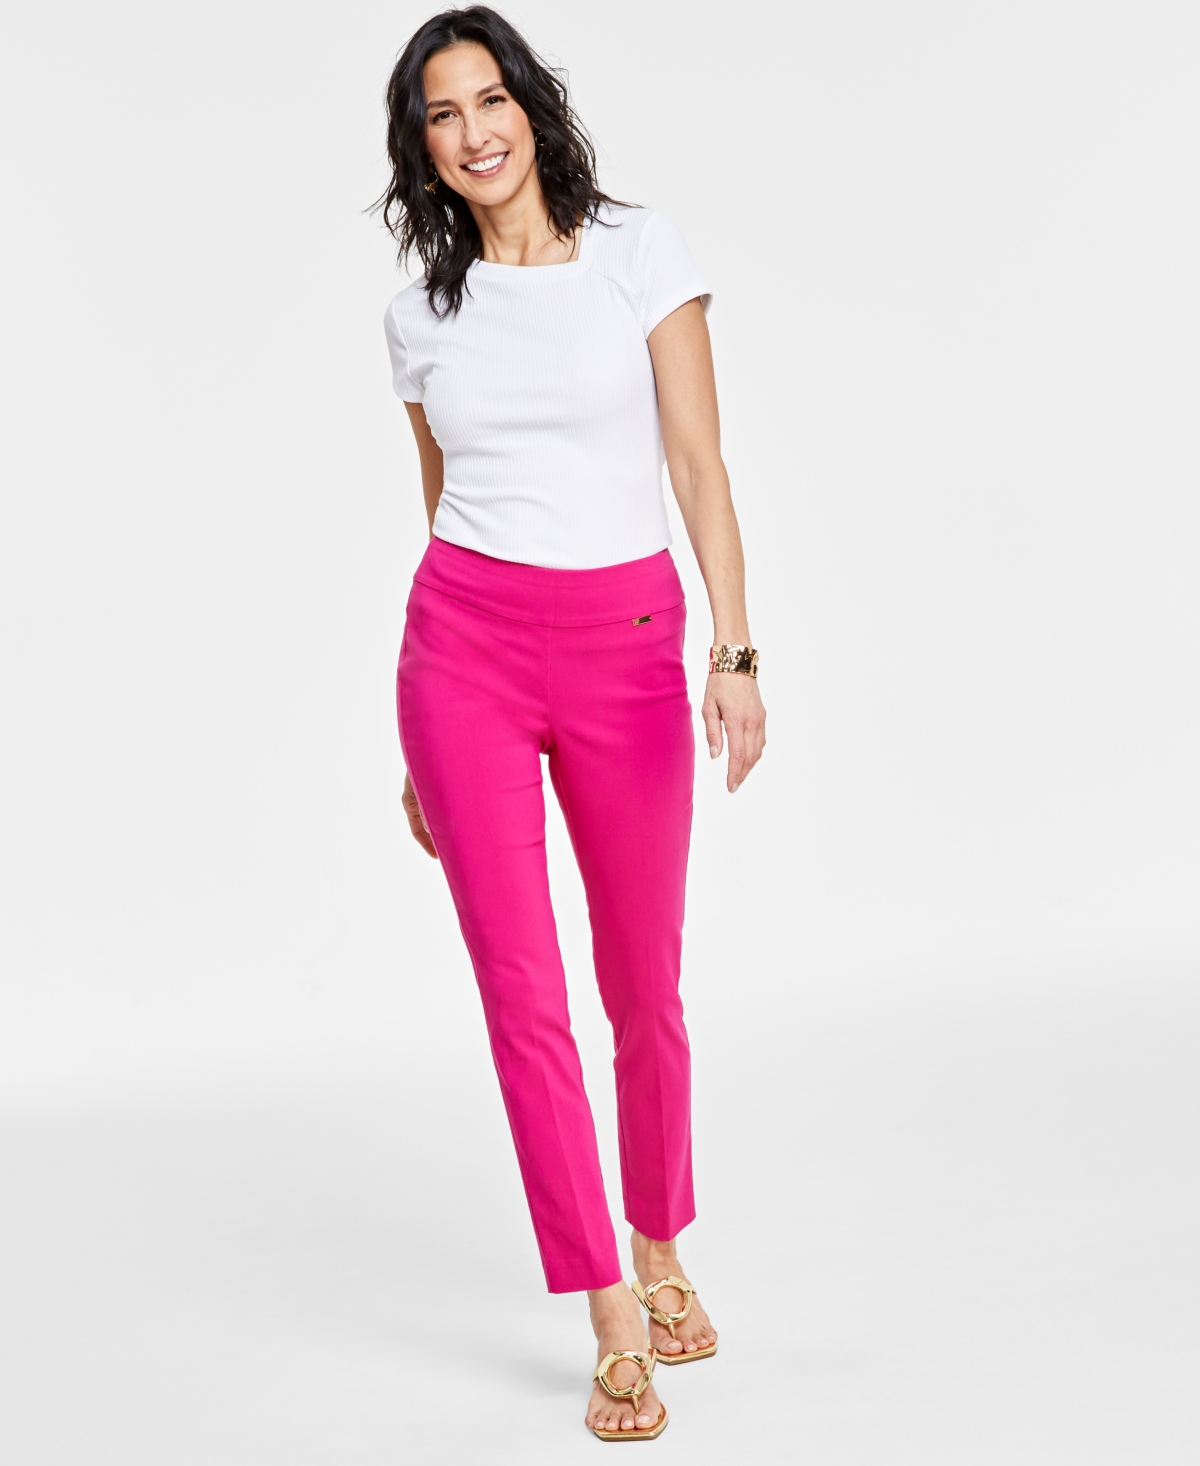 Inc International Concepts Mid-rise Petite Tummy-control Skinny Pants, Petite & Petite Short, Created For Macy's In Pink Dragonfrui